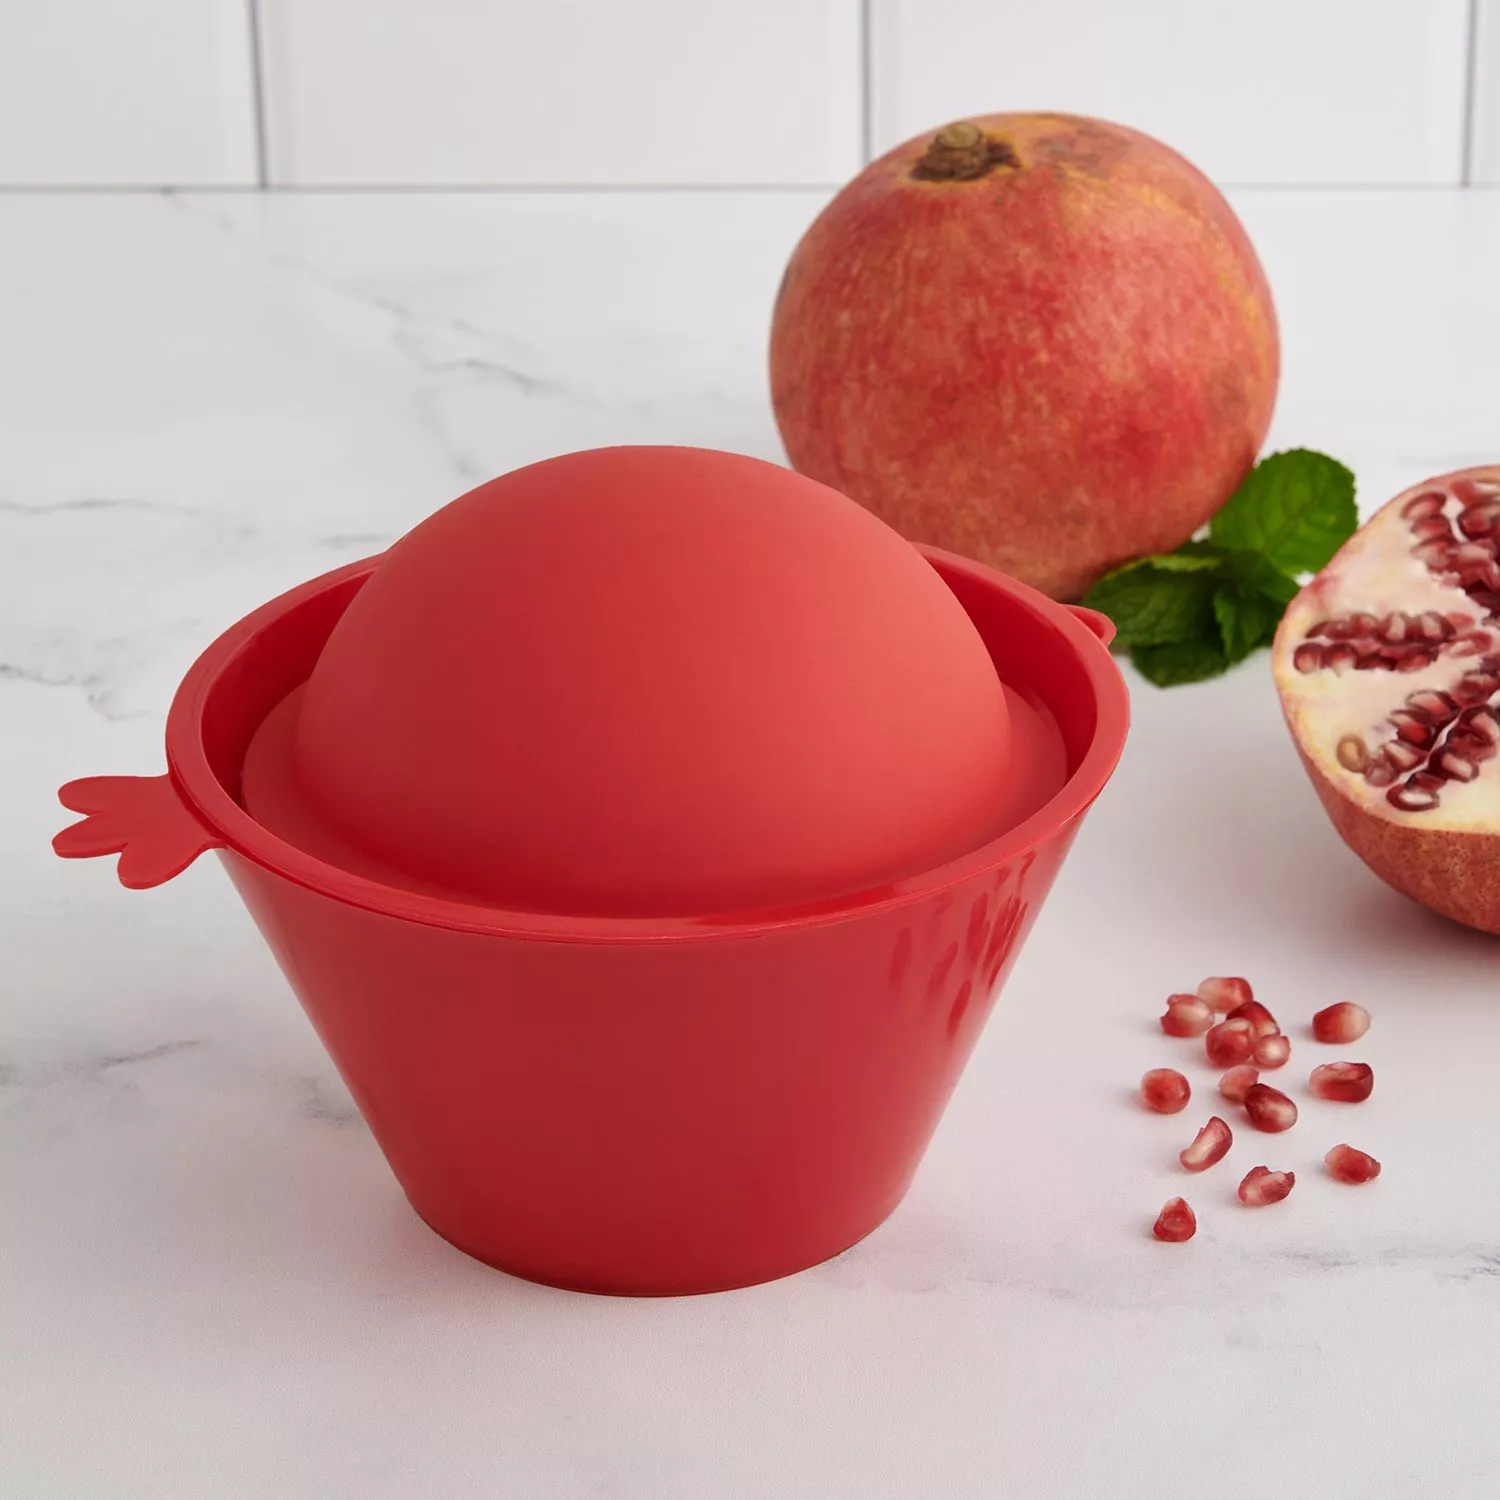 Pomegranate Kitchen Gadget Easy to Handle Sharp Tool for Specialty Tools &  Gadgets